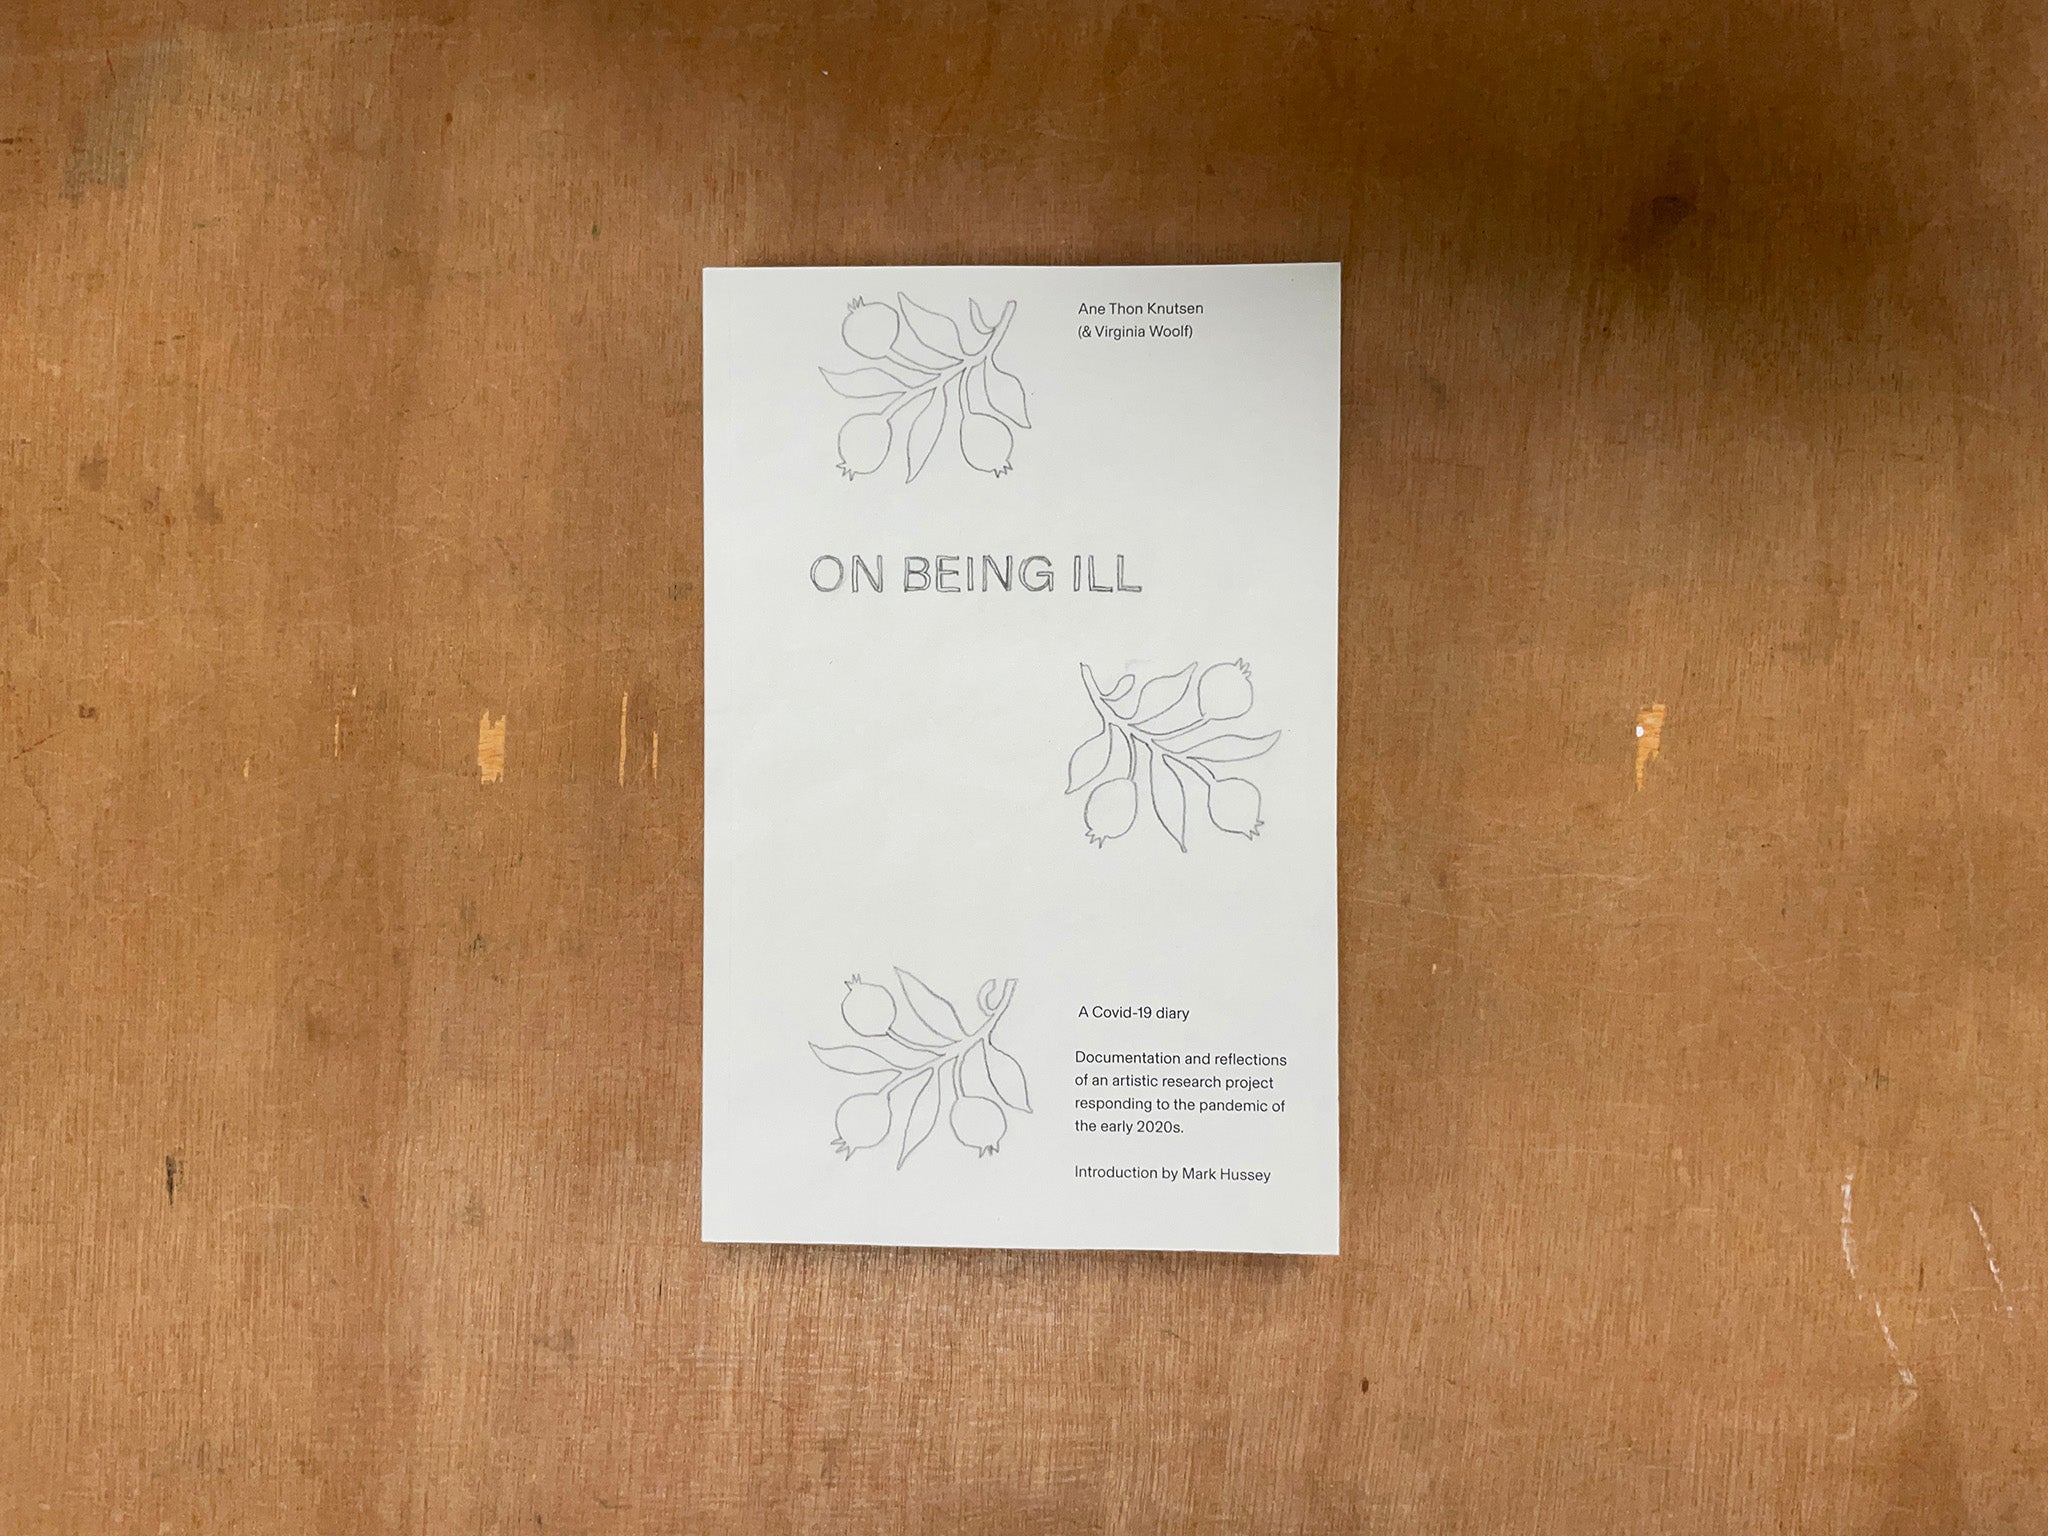 ON BEING ILL - A COVID-19 DIARY by Ane Thon Knutsen